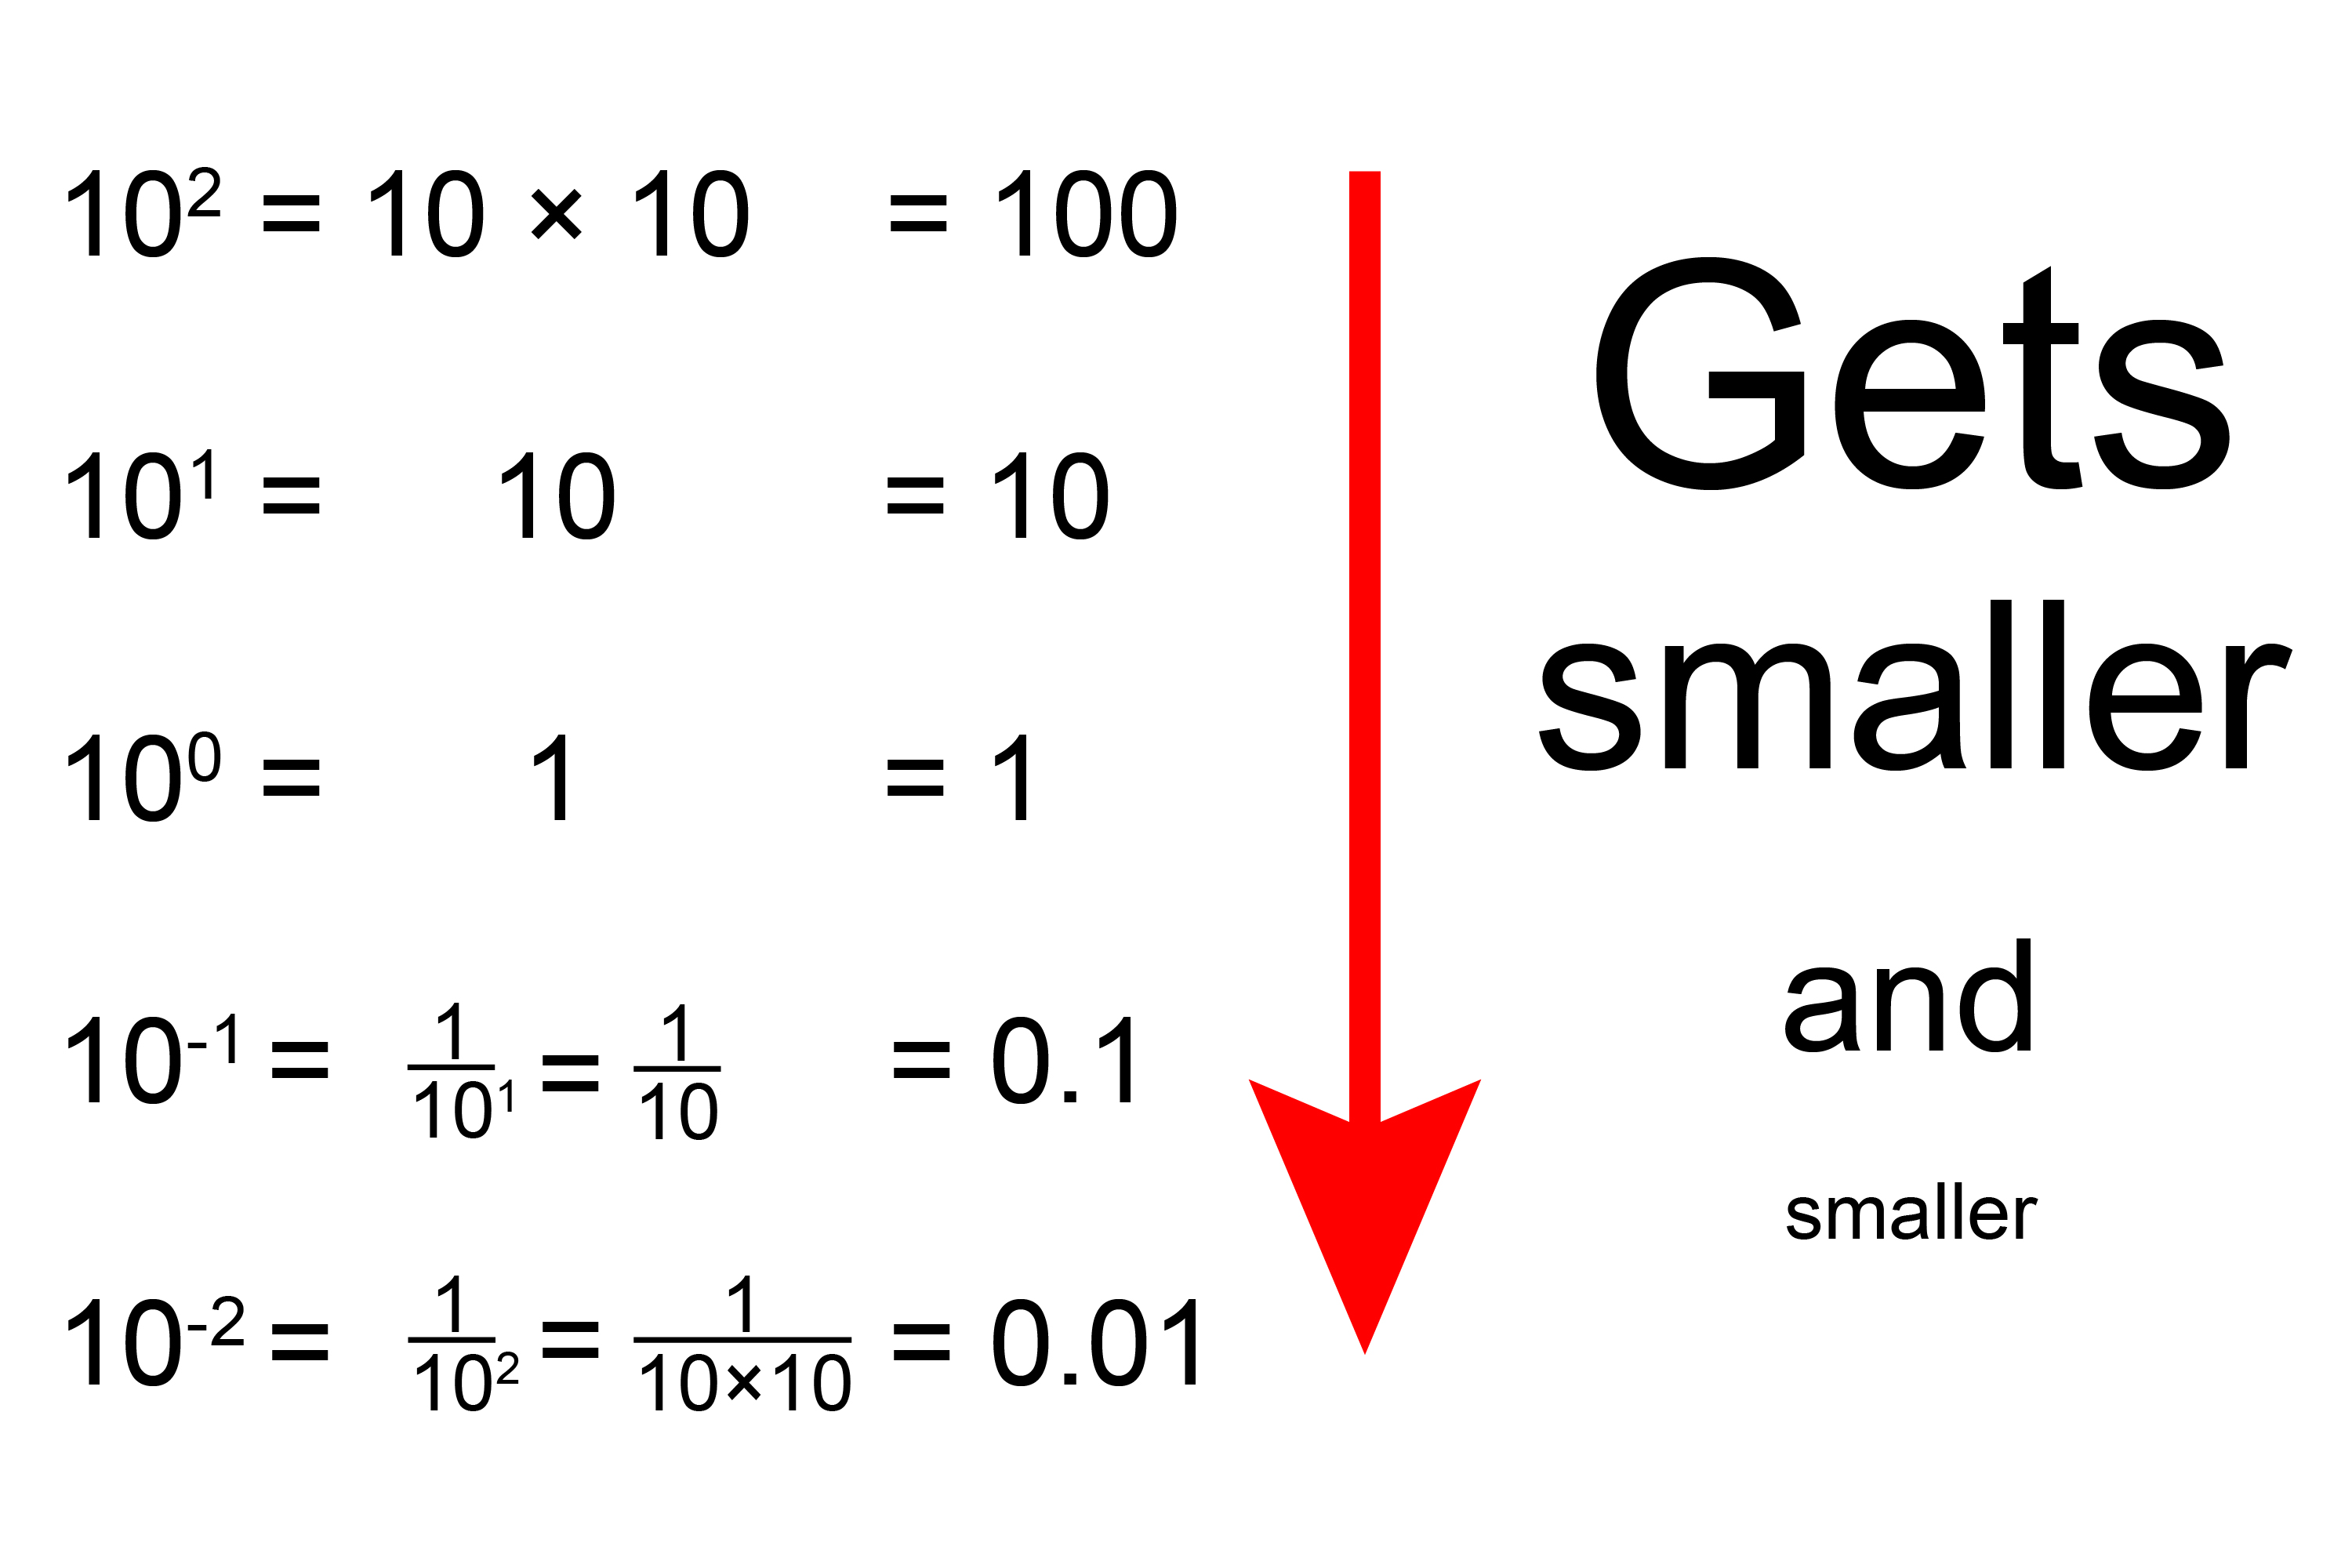 Remove 1 from the power and the answer gets smaller and smaller